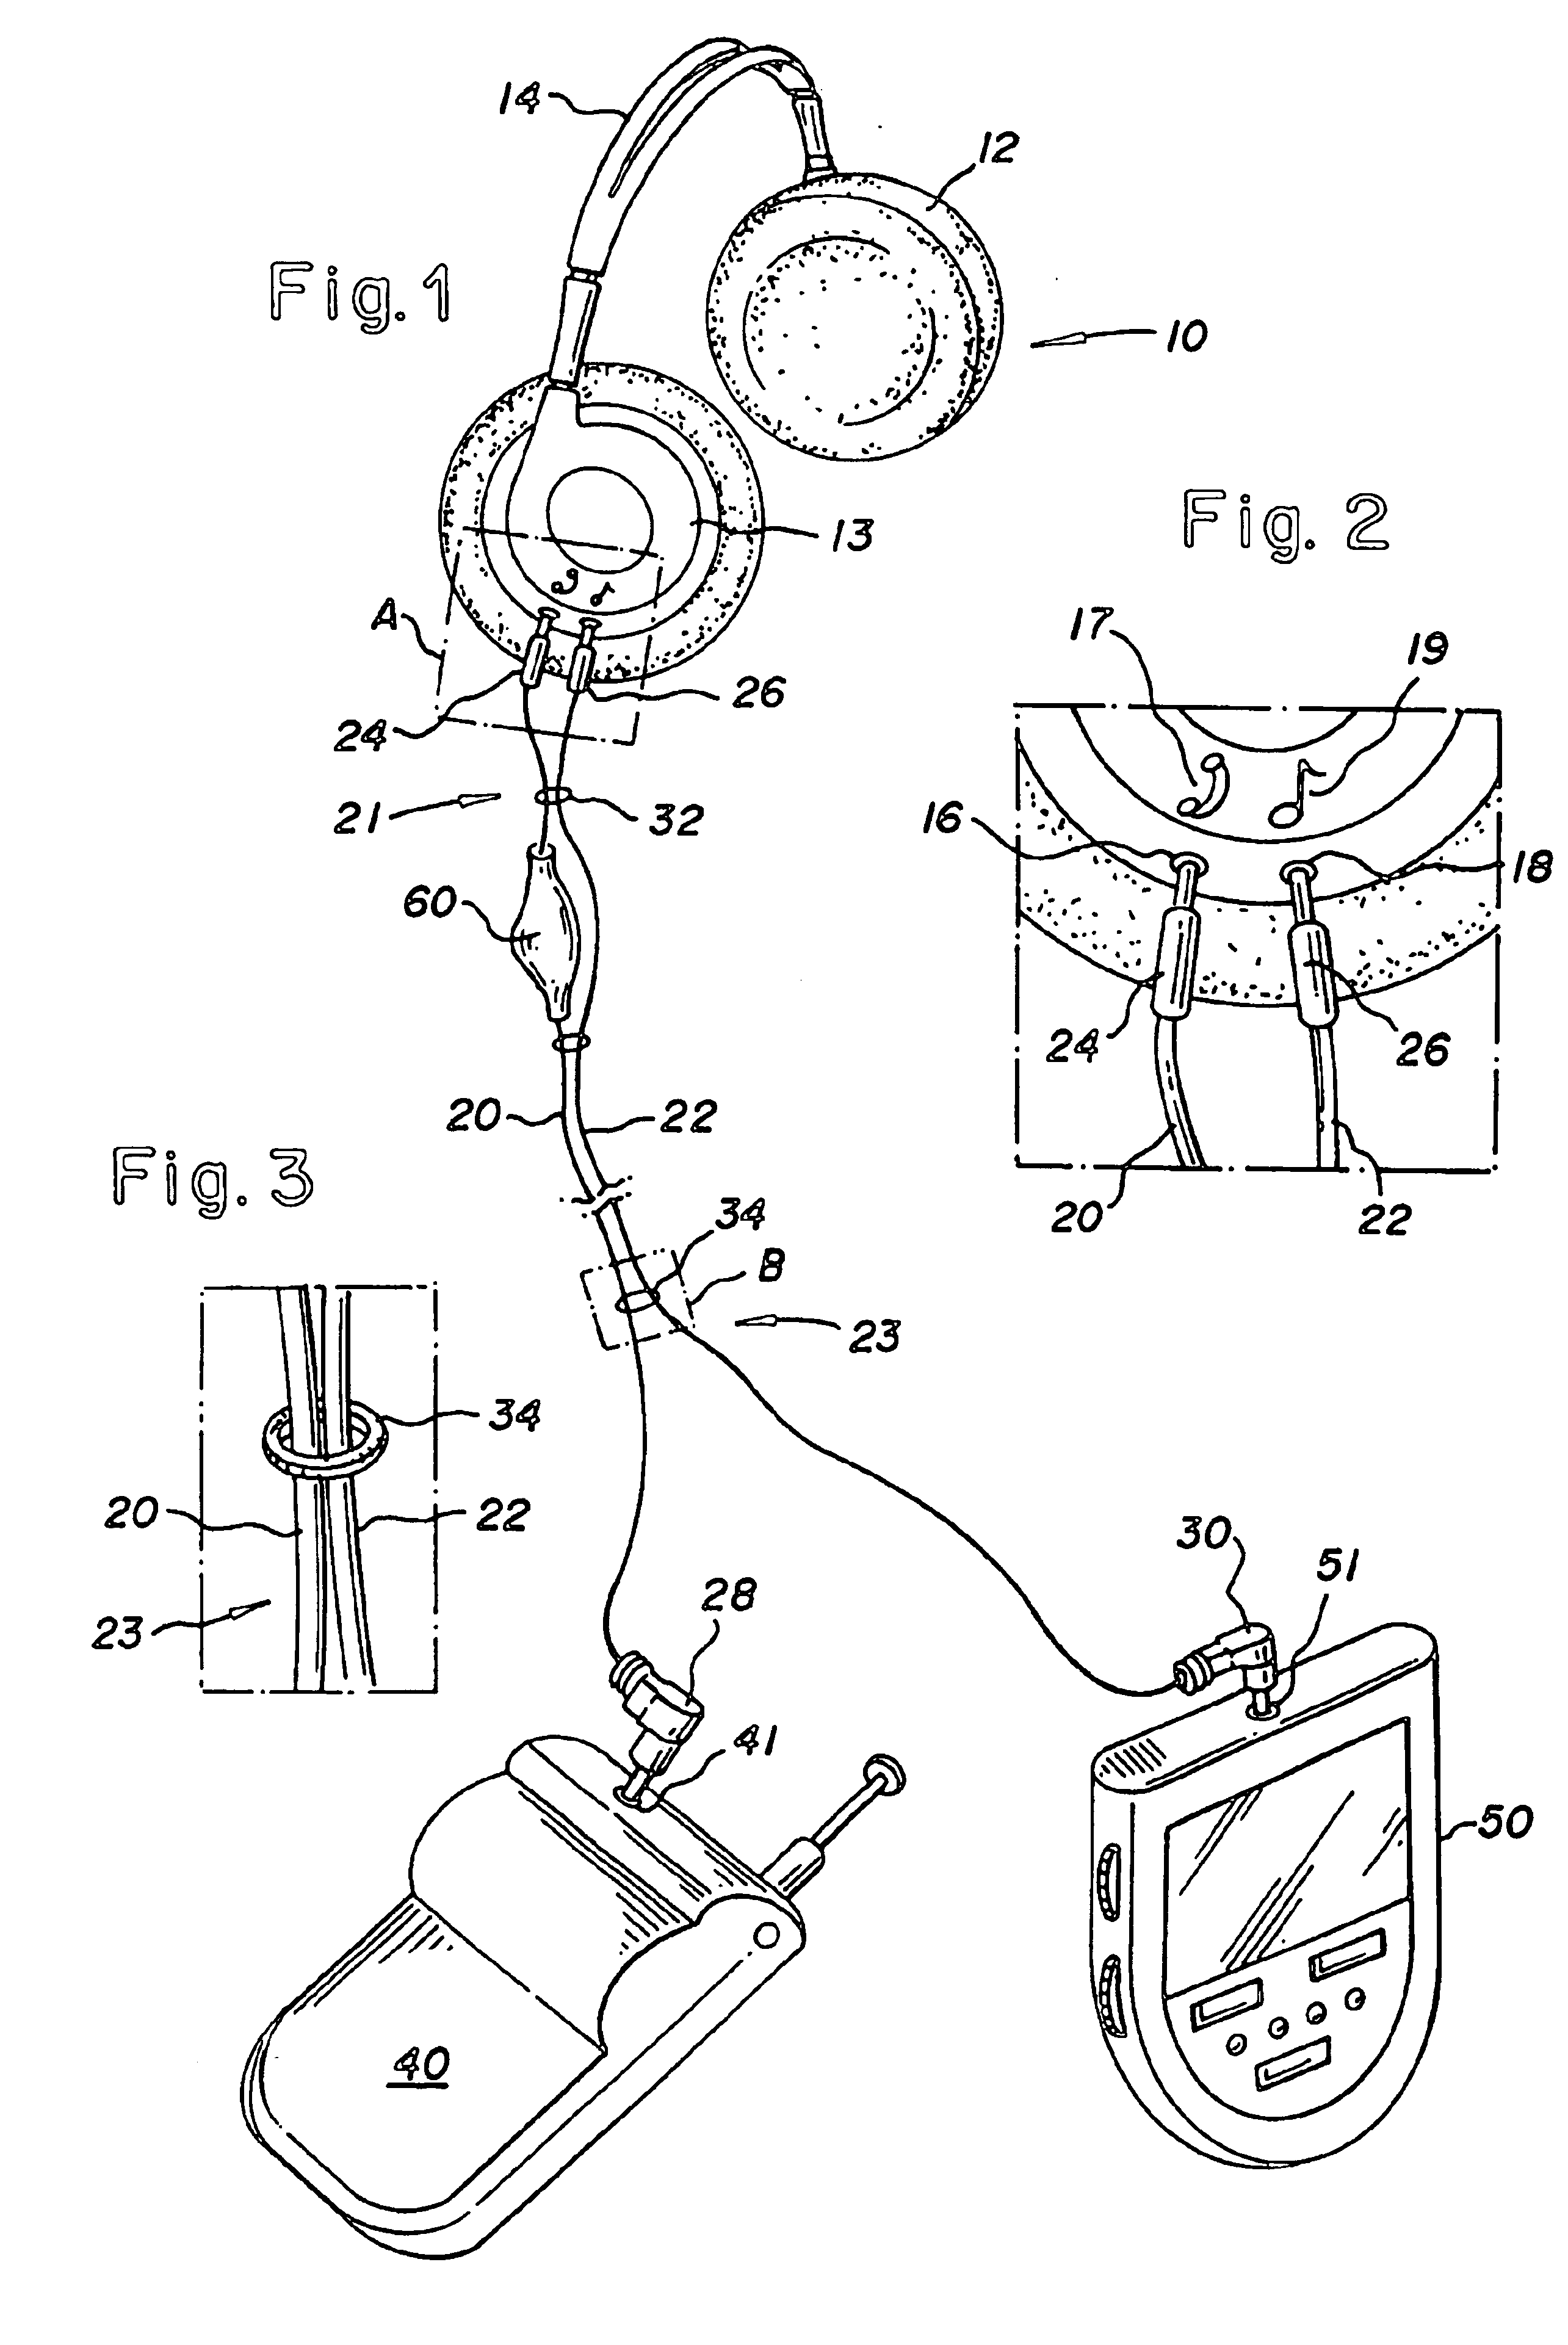 Wireless headphones with selective connection to auxiliary audio devices and a cellular telephone